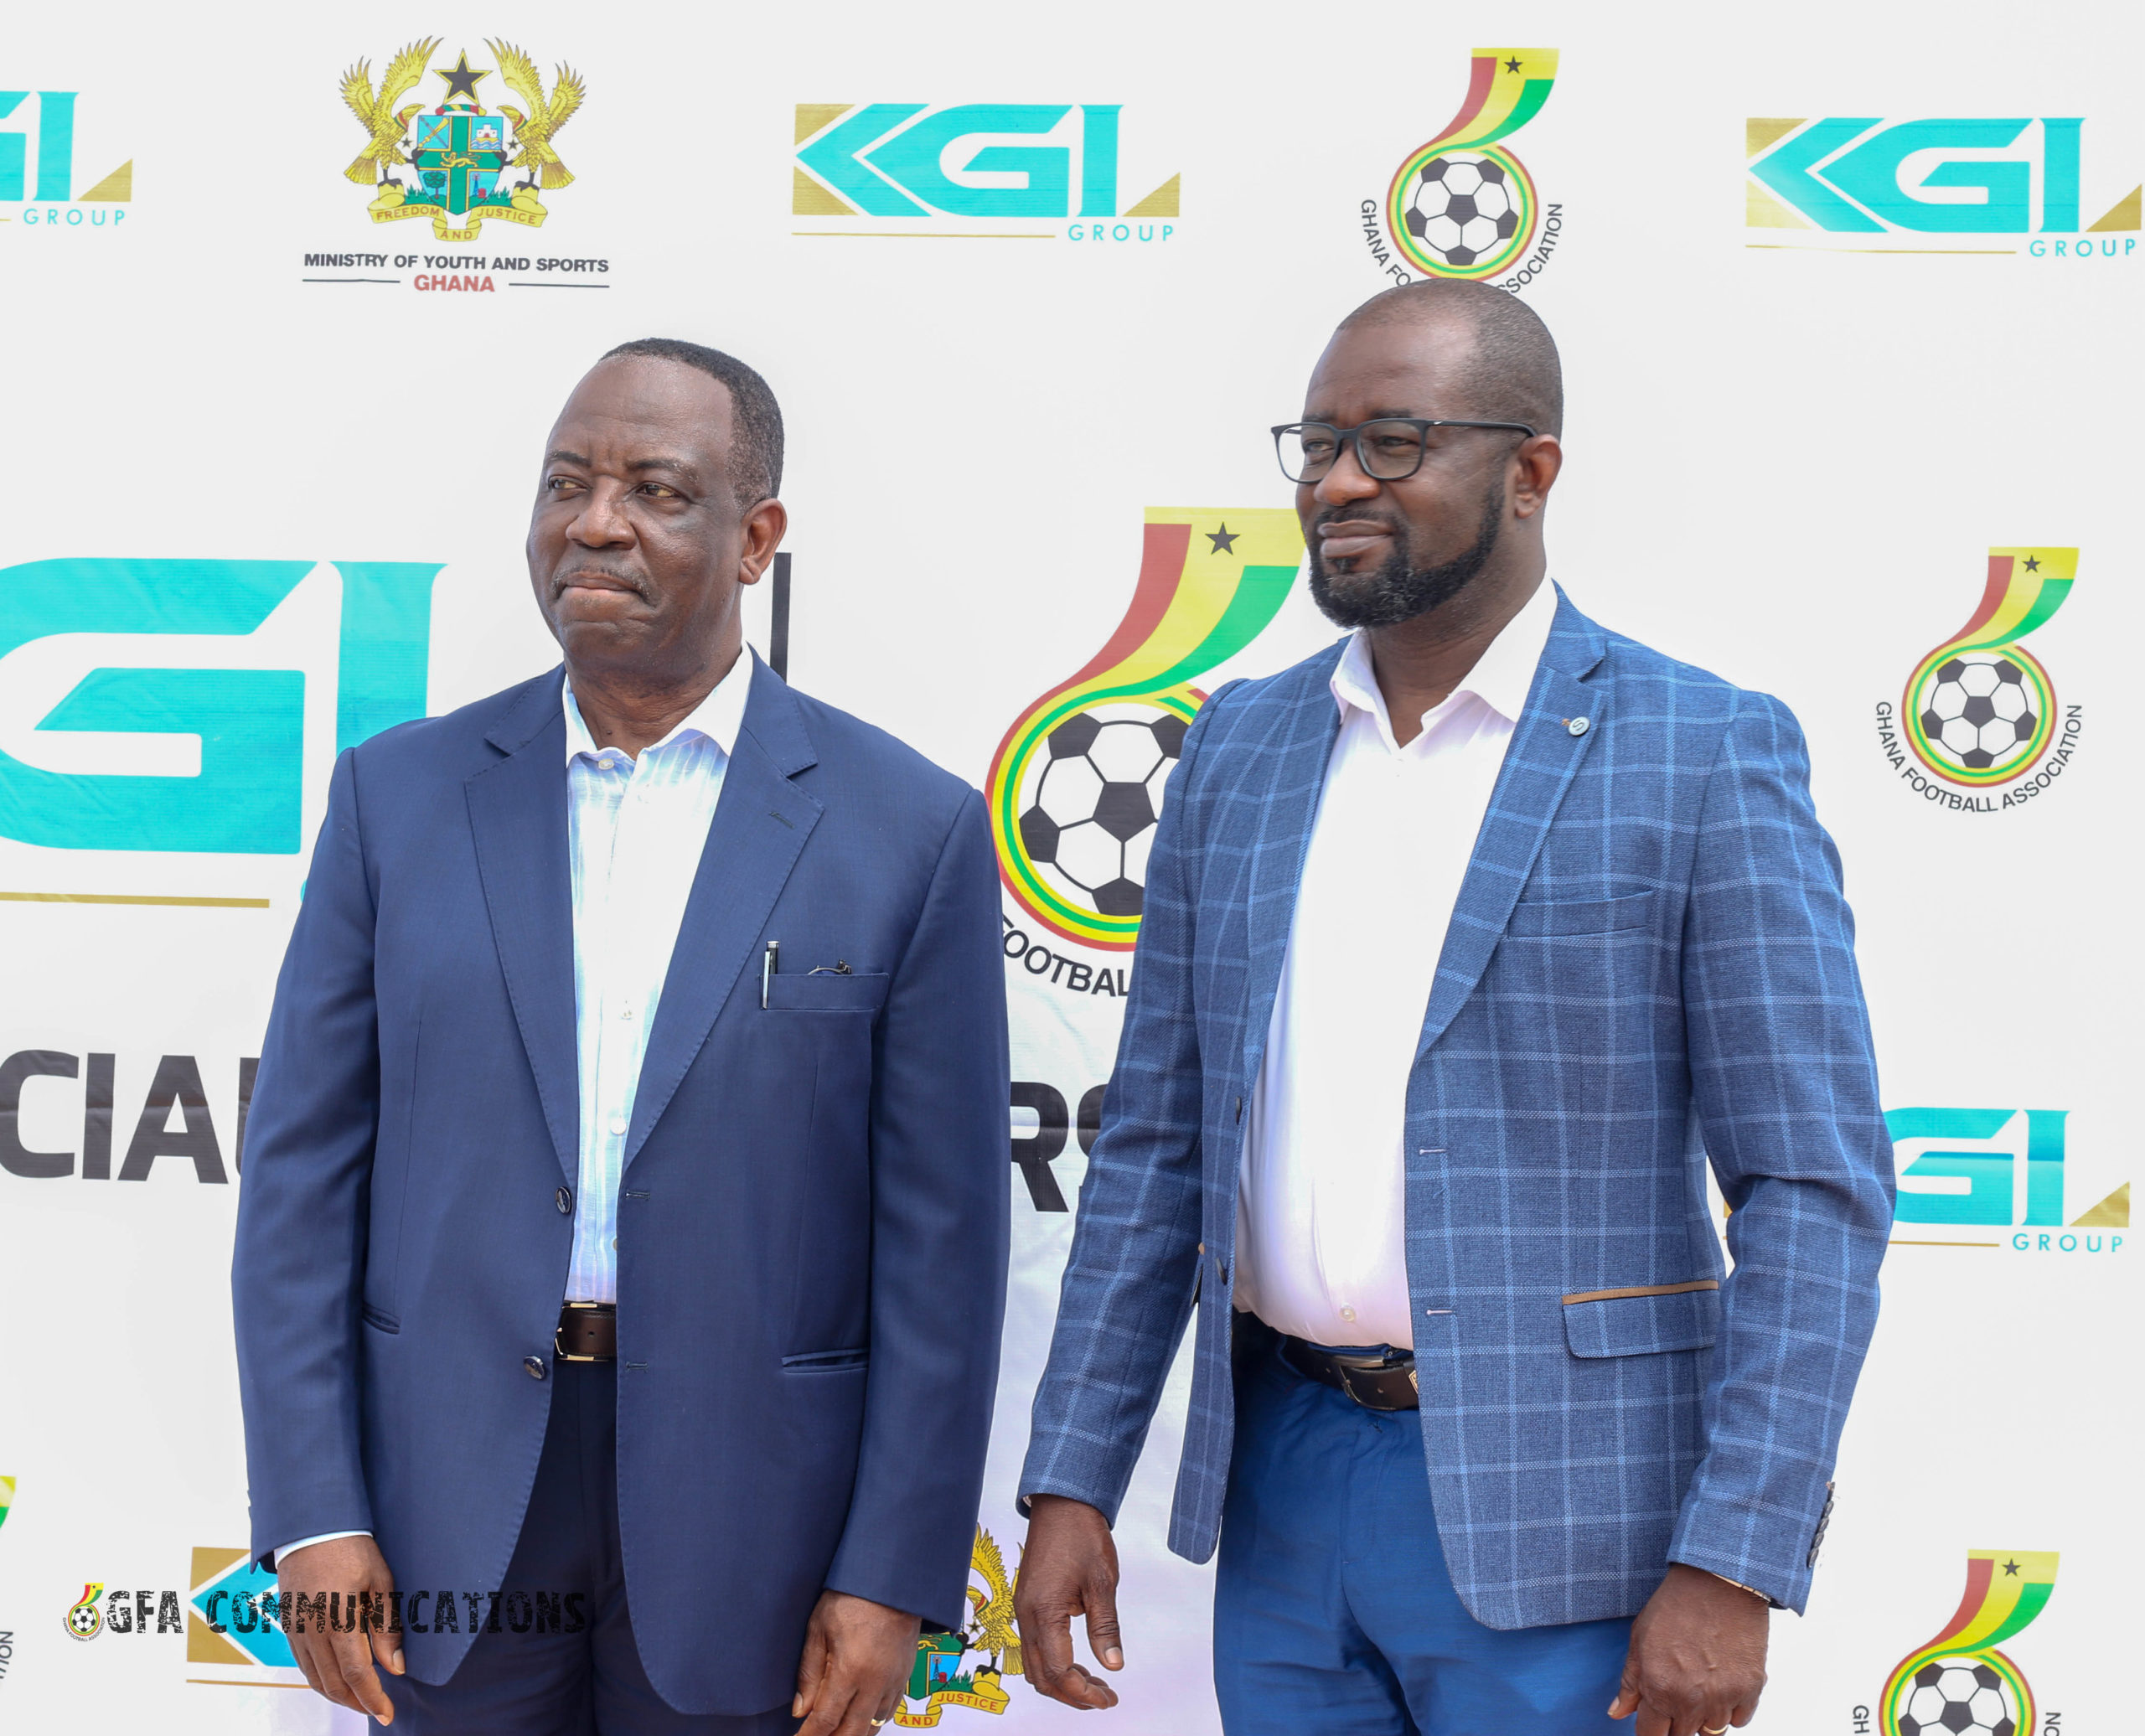 KGL Foundation agree to sponsor juvenile football in Ghana with $1 million for 5 years